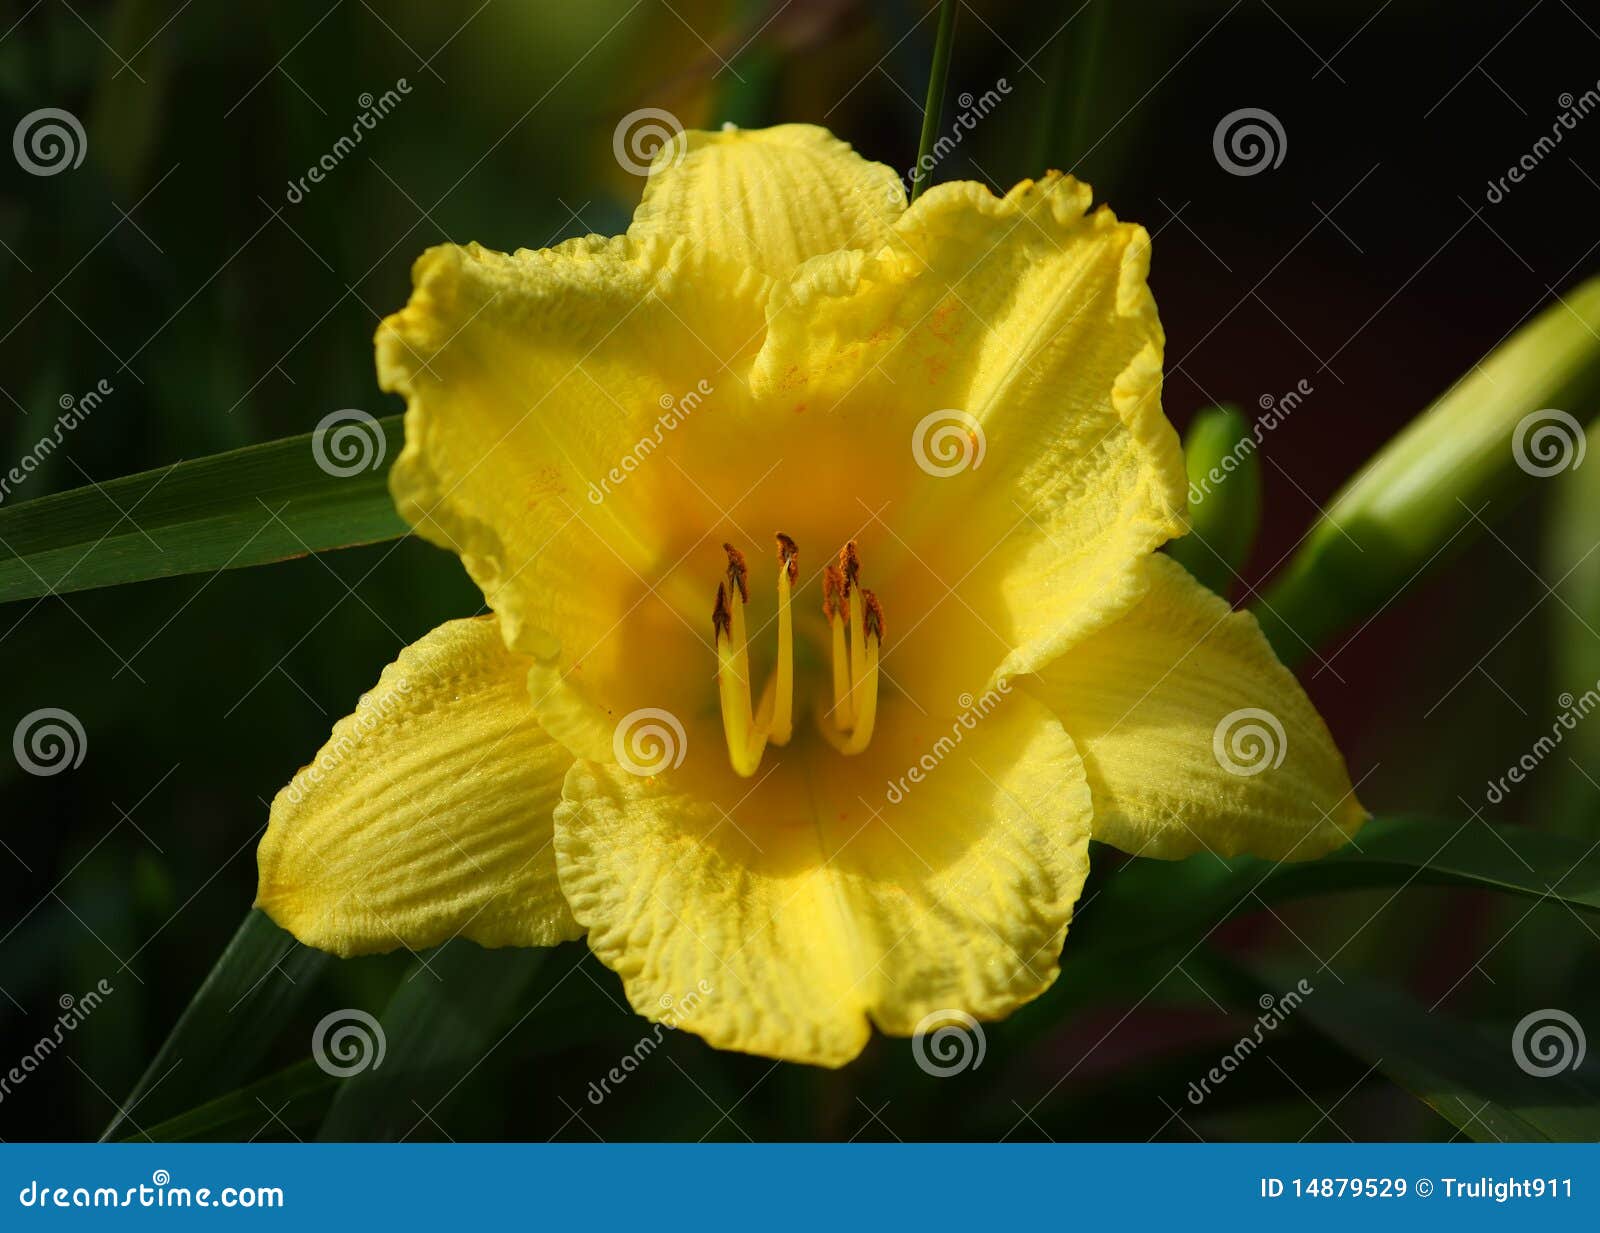 Yellow Trumpet Daffodil Royalty Free Stock Images  Image: 14879529